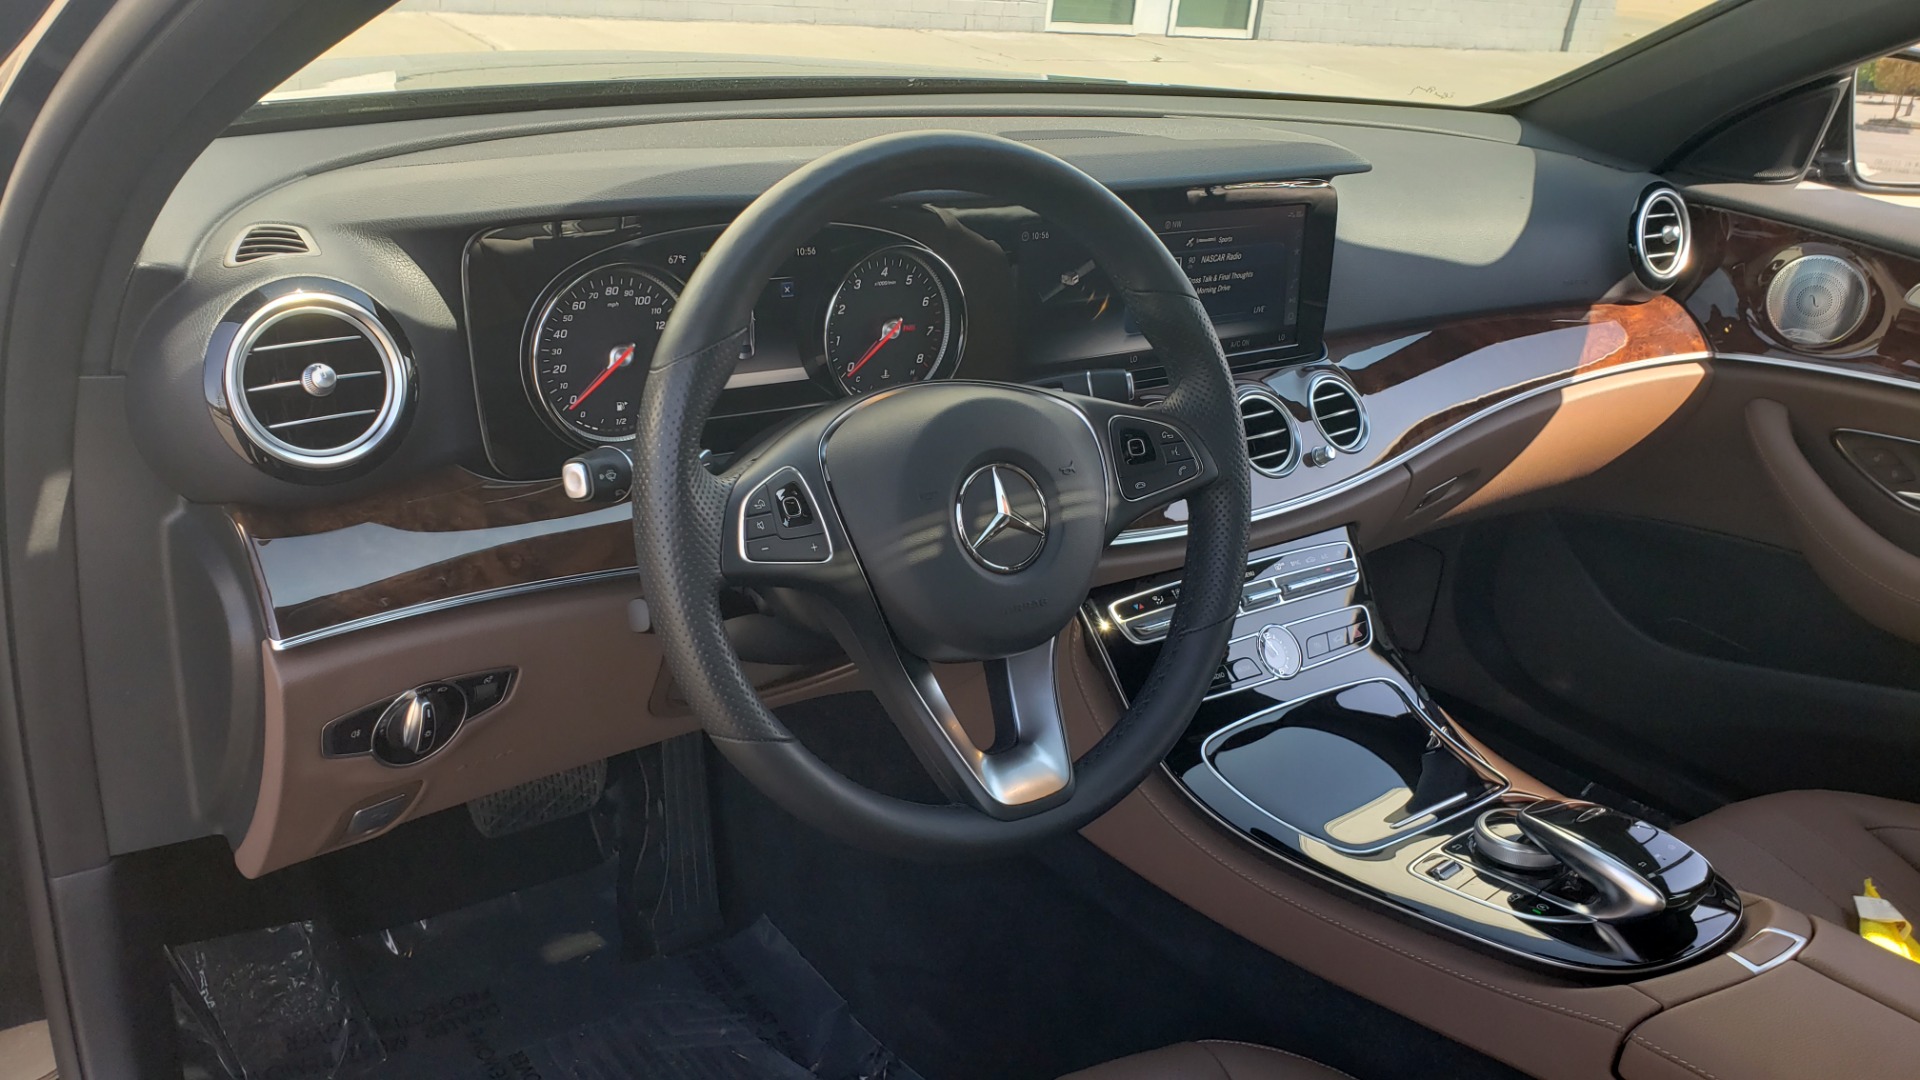 Used 2018 Mercedes-Benz E-CLASS E 300 4MATIC PREMIUM / NAV / BURMESTER SND / BSM / REARVIEW for sale Sold at Formula Imports in Charlotte NC 28227 38